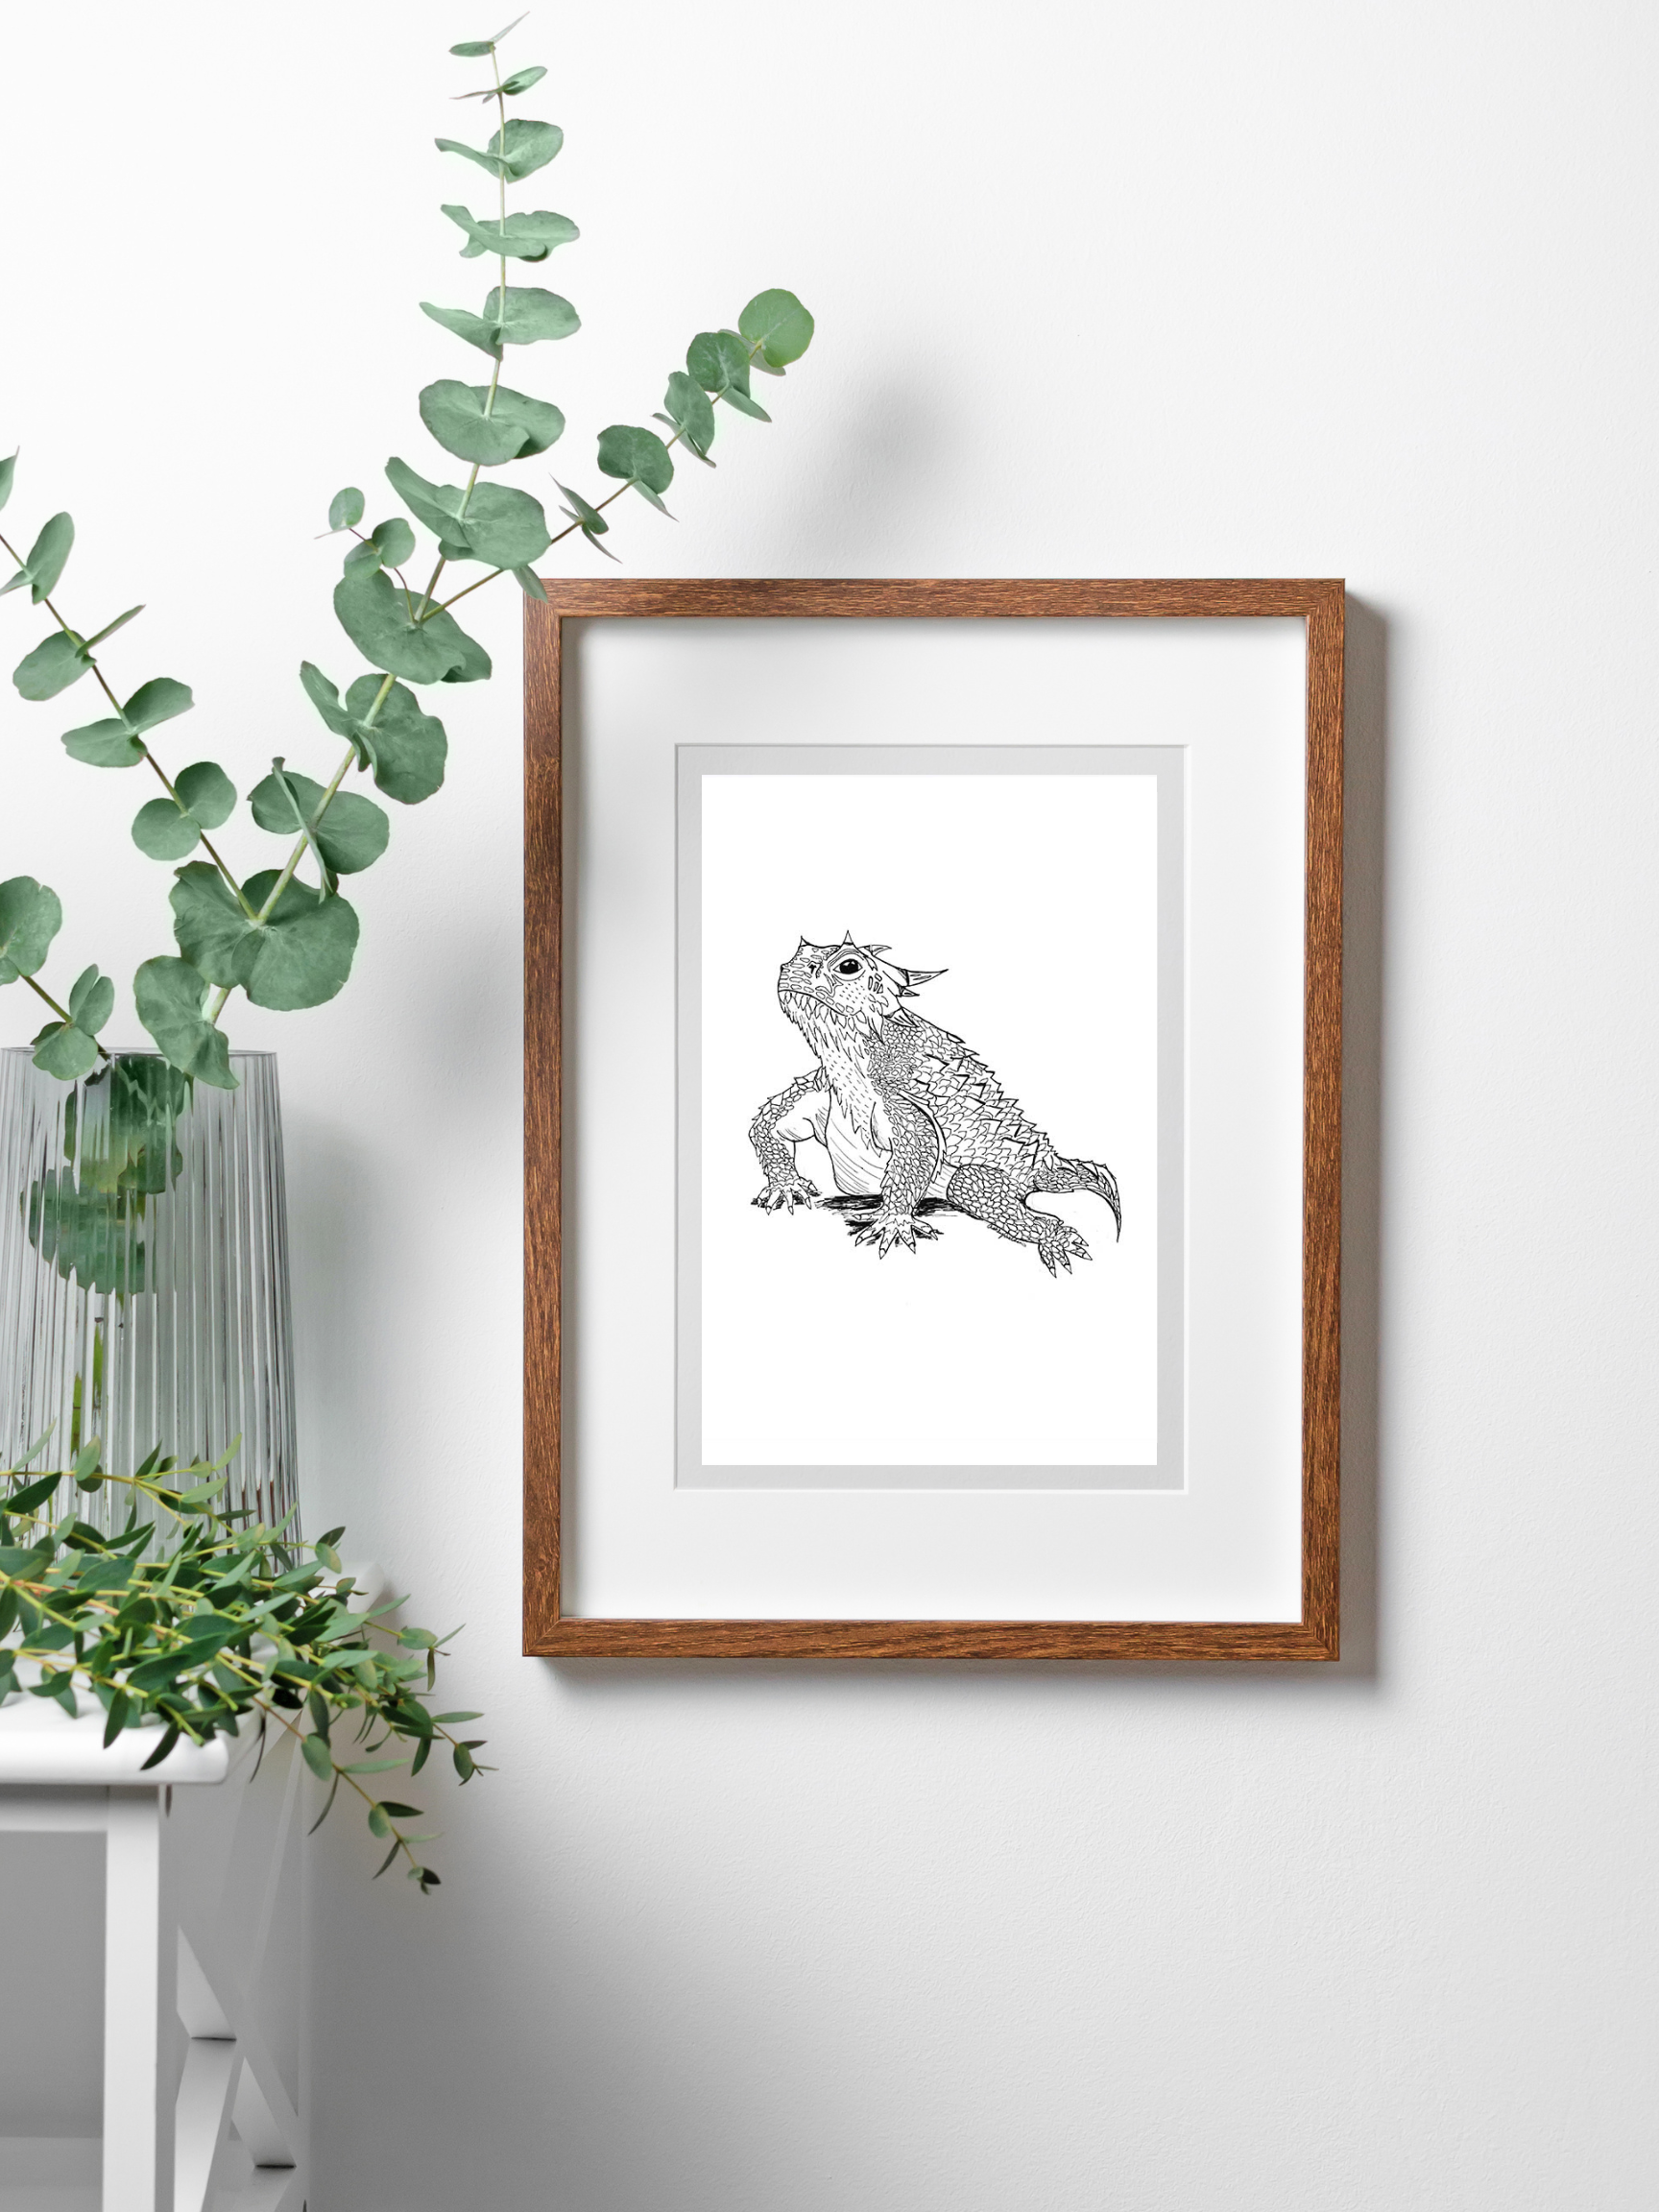 horned toad art print in frame on wall